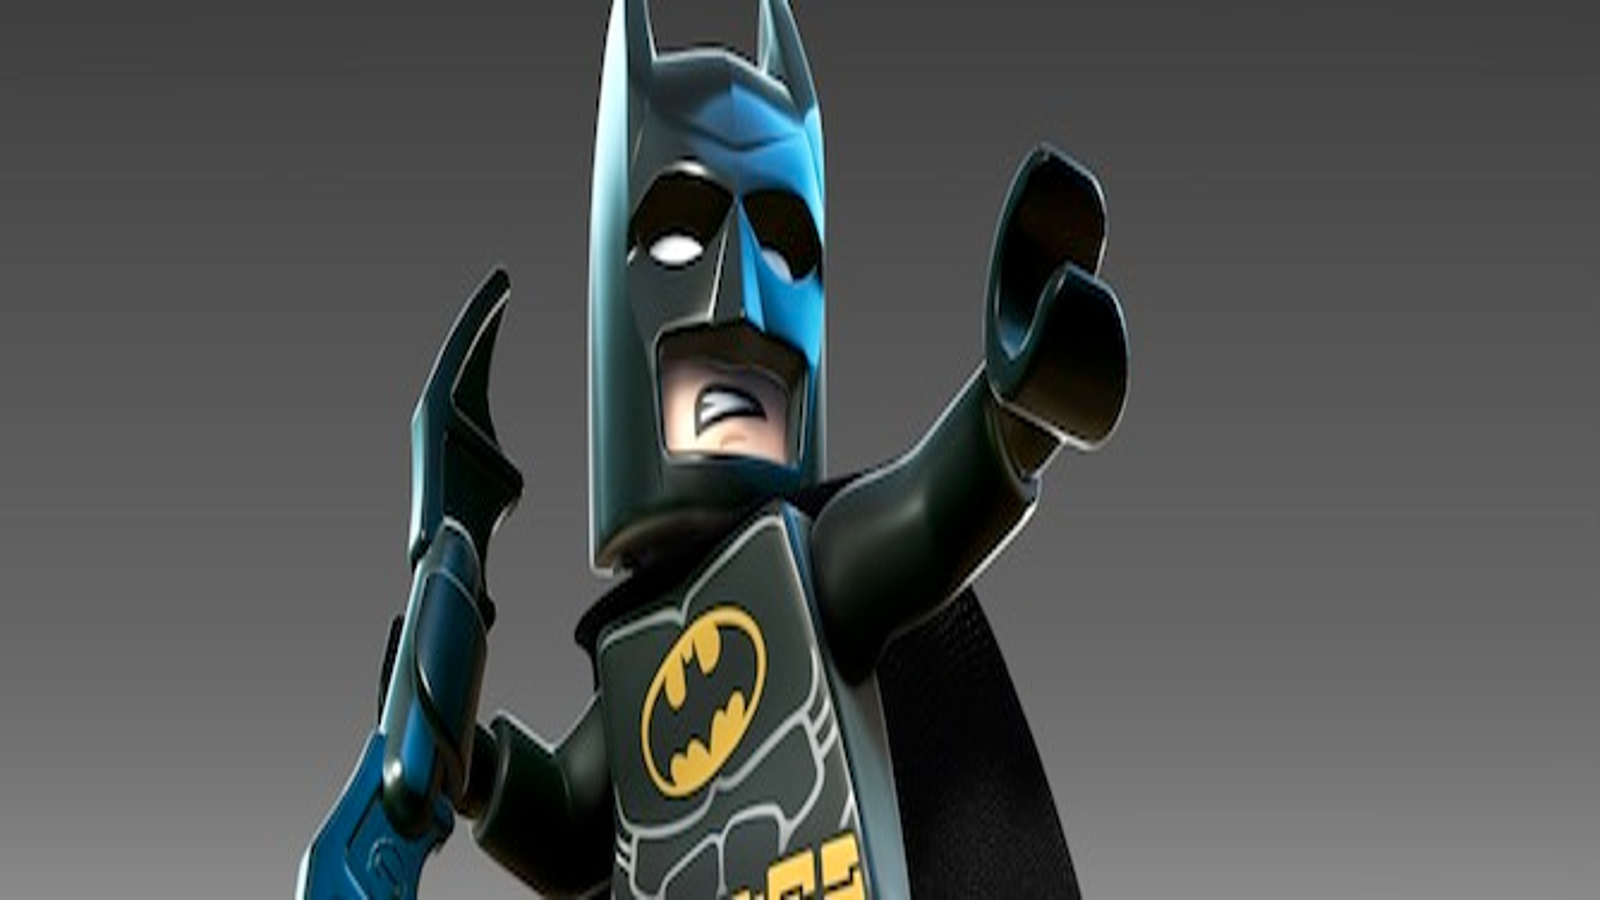 Lego Batman 2: DC Super Heroes Wii U release date listed by retailers |  VG247